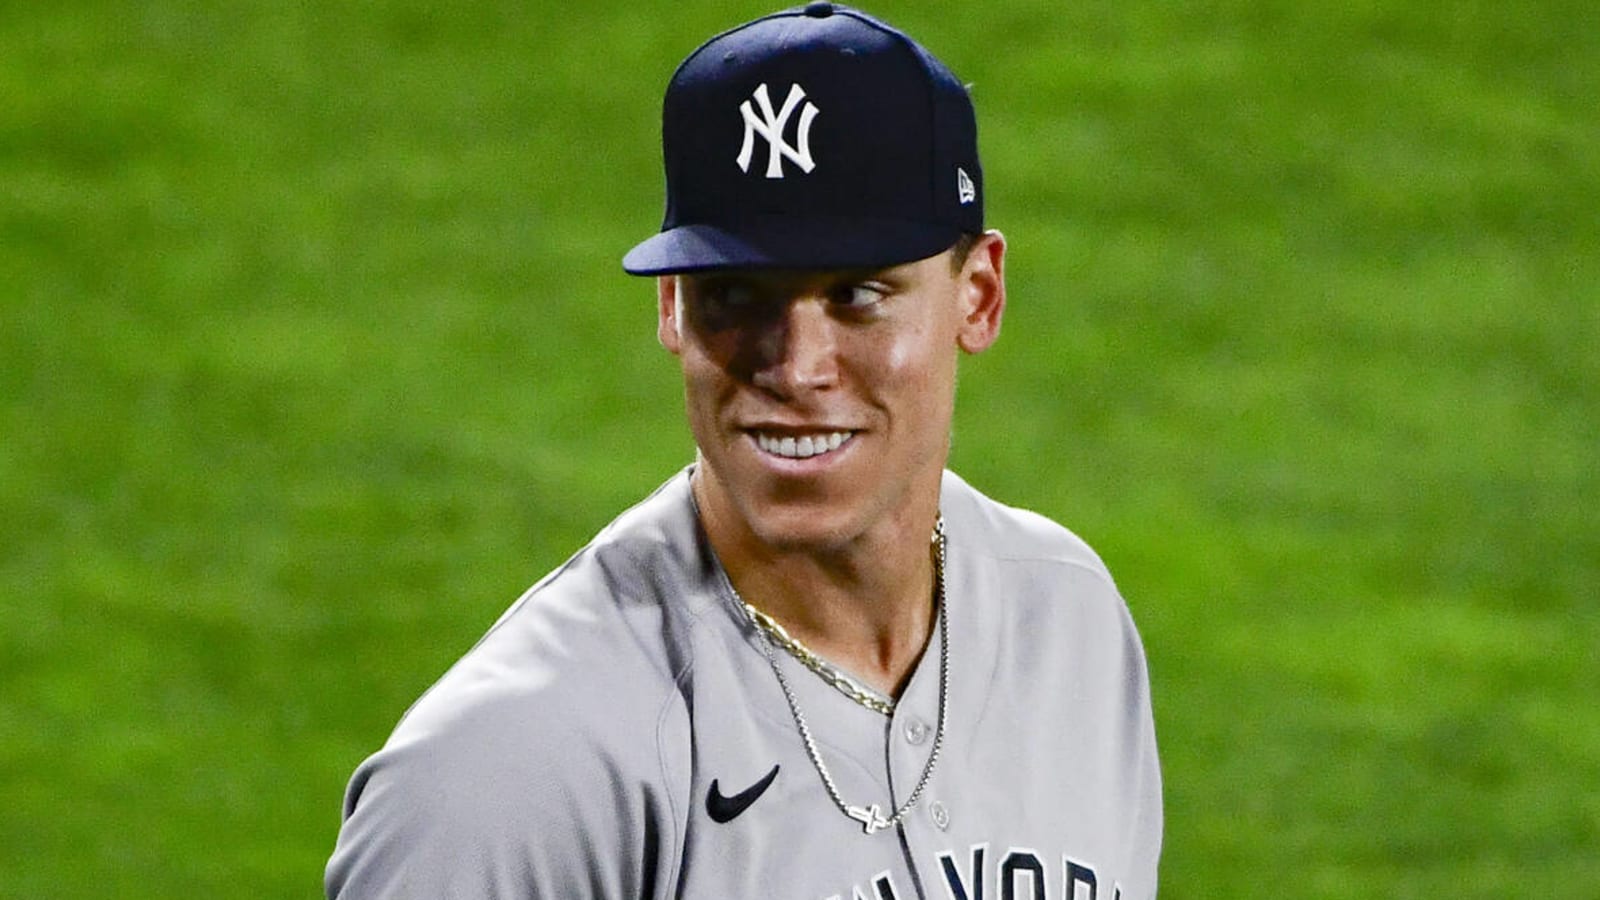 Yankees' Aaron Judge named All-Star starter … but will he be ready to play?  